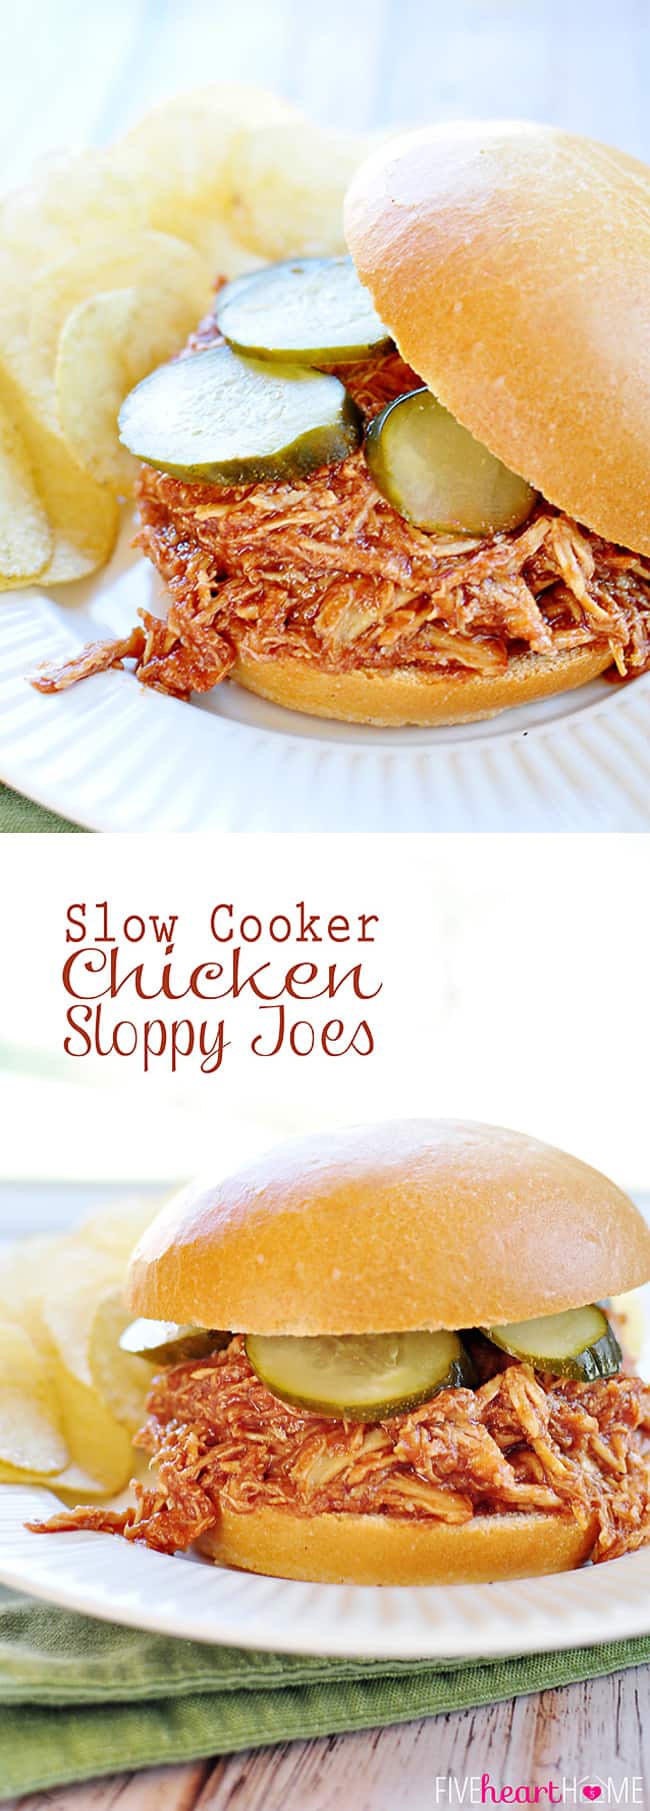 Slow Cooker Chicken Sloppy Joes ~ juicy shredded chicken meets homemade sauce in these effortless sandwiches | FiveHeartHome.com via @fivehearthome